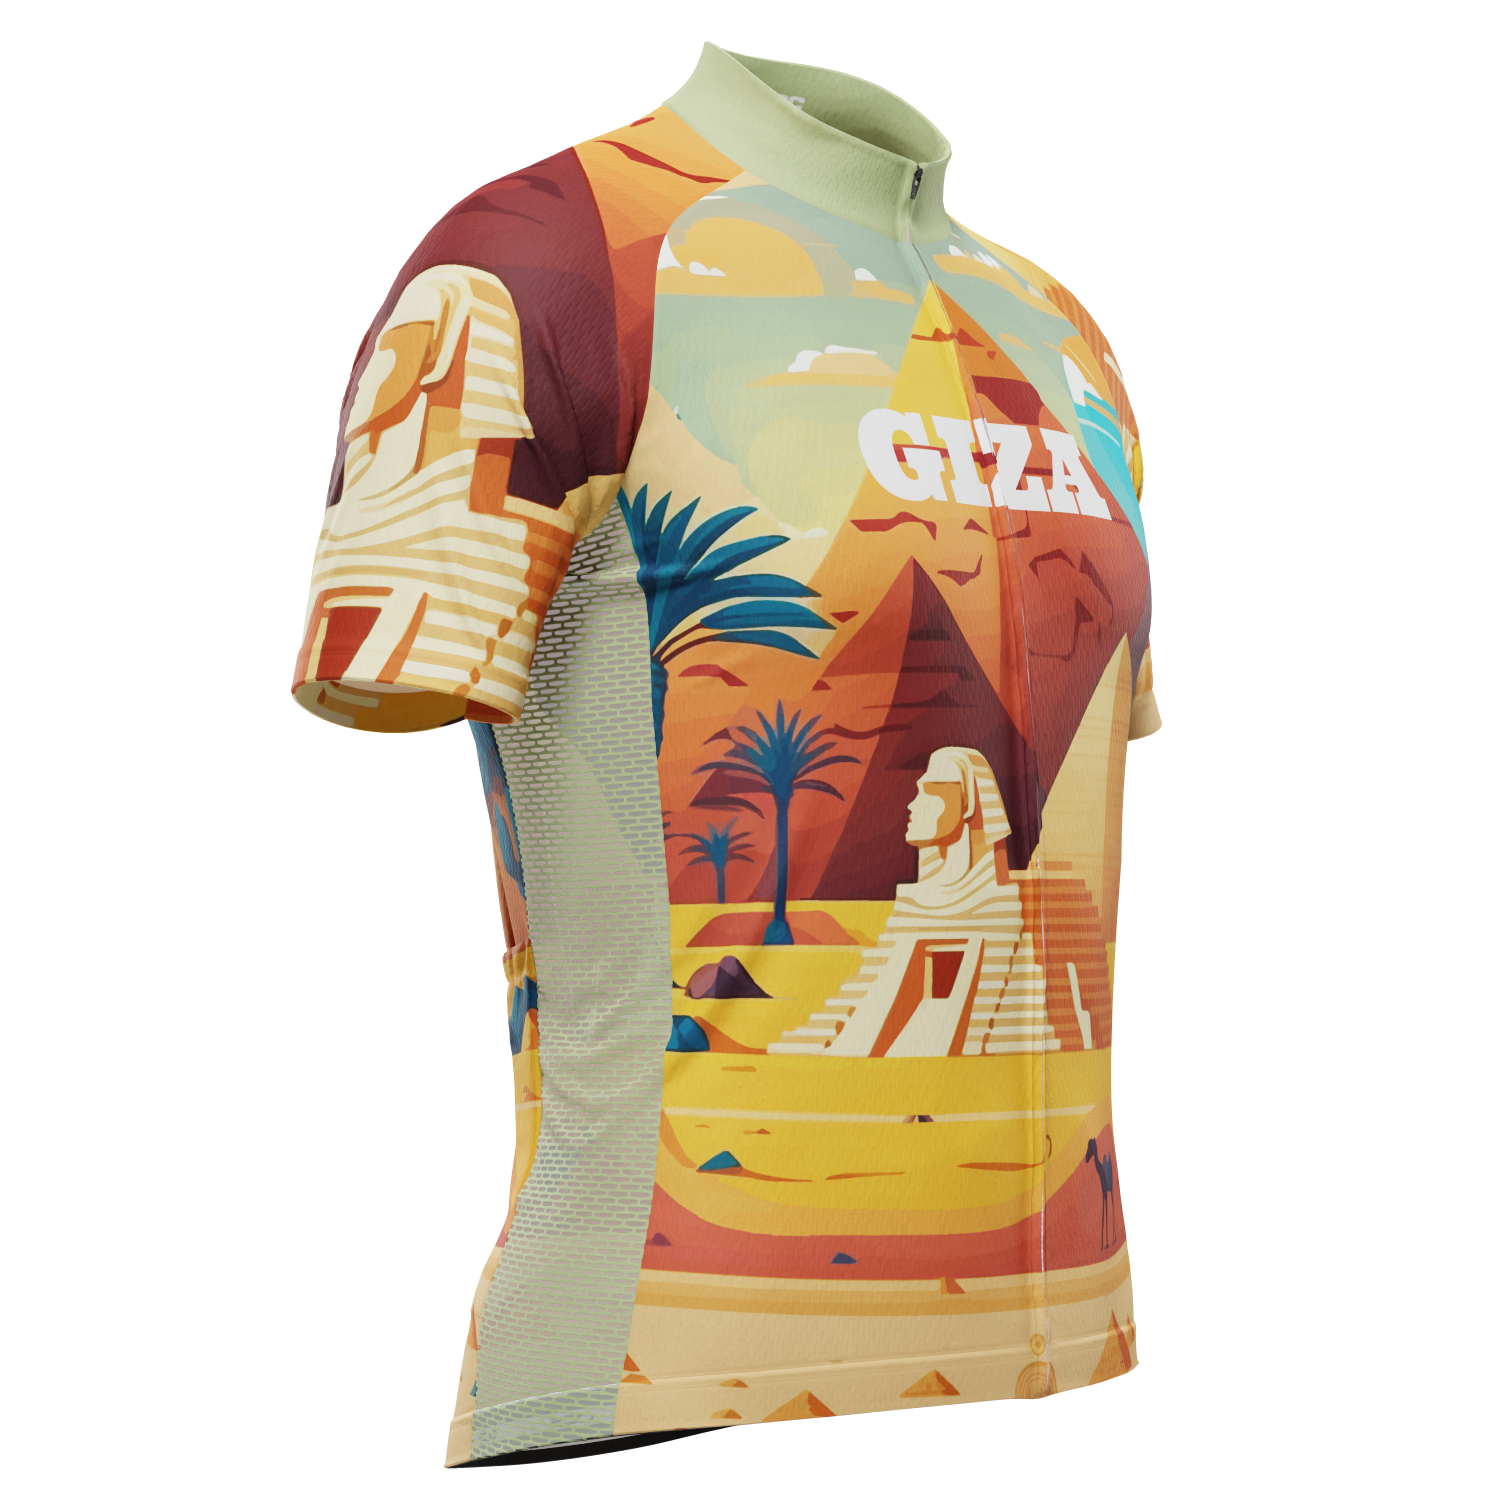 Men's Around The World - Giza Short Sleeve Cycling Jersey